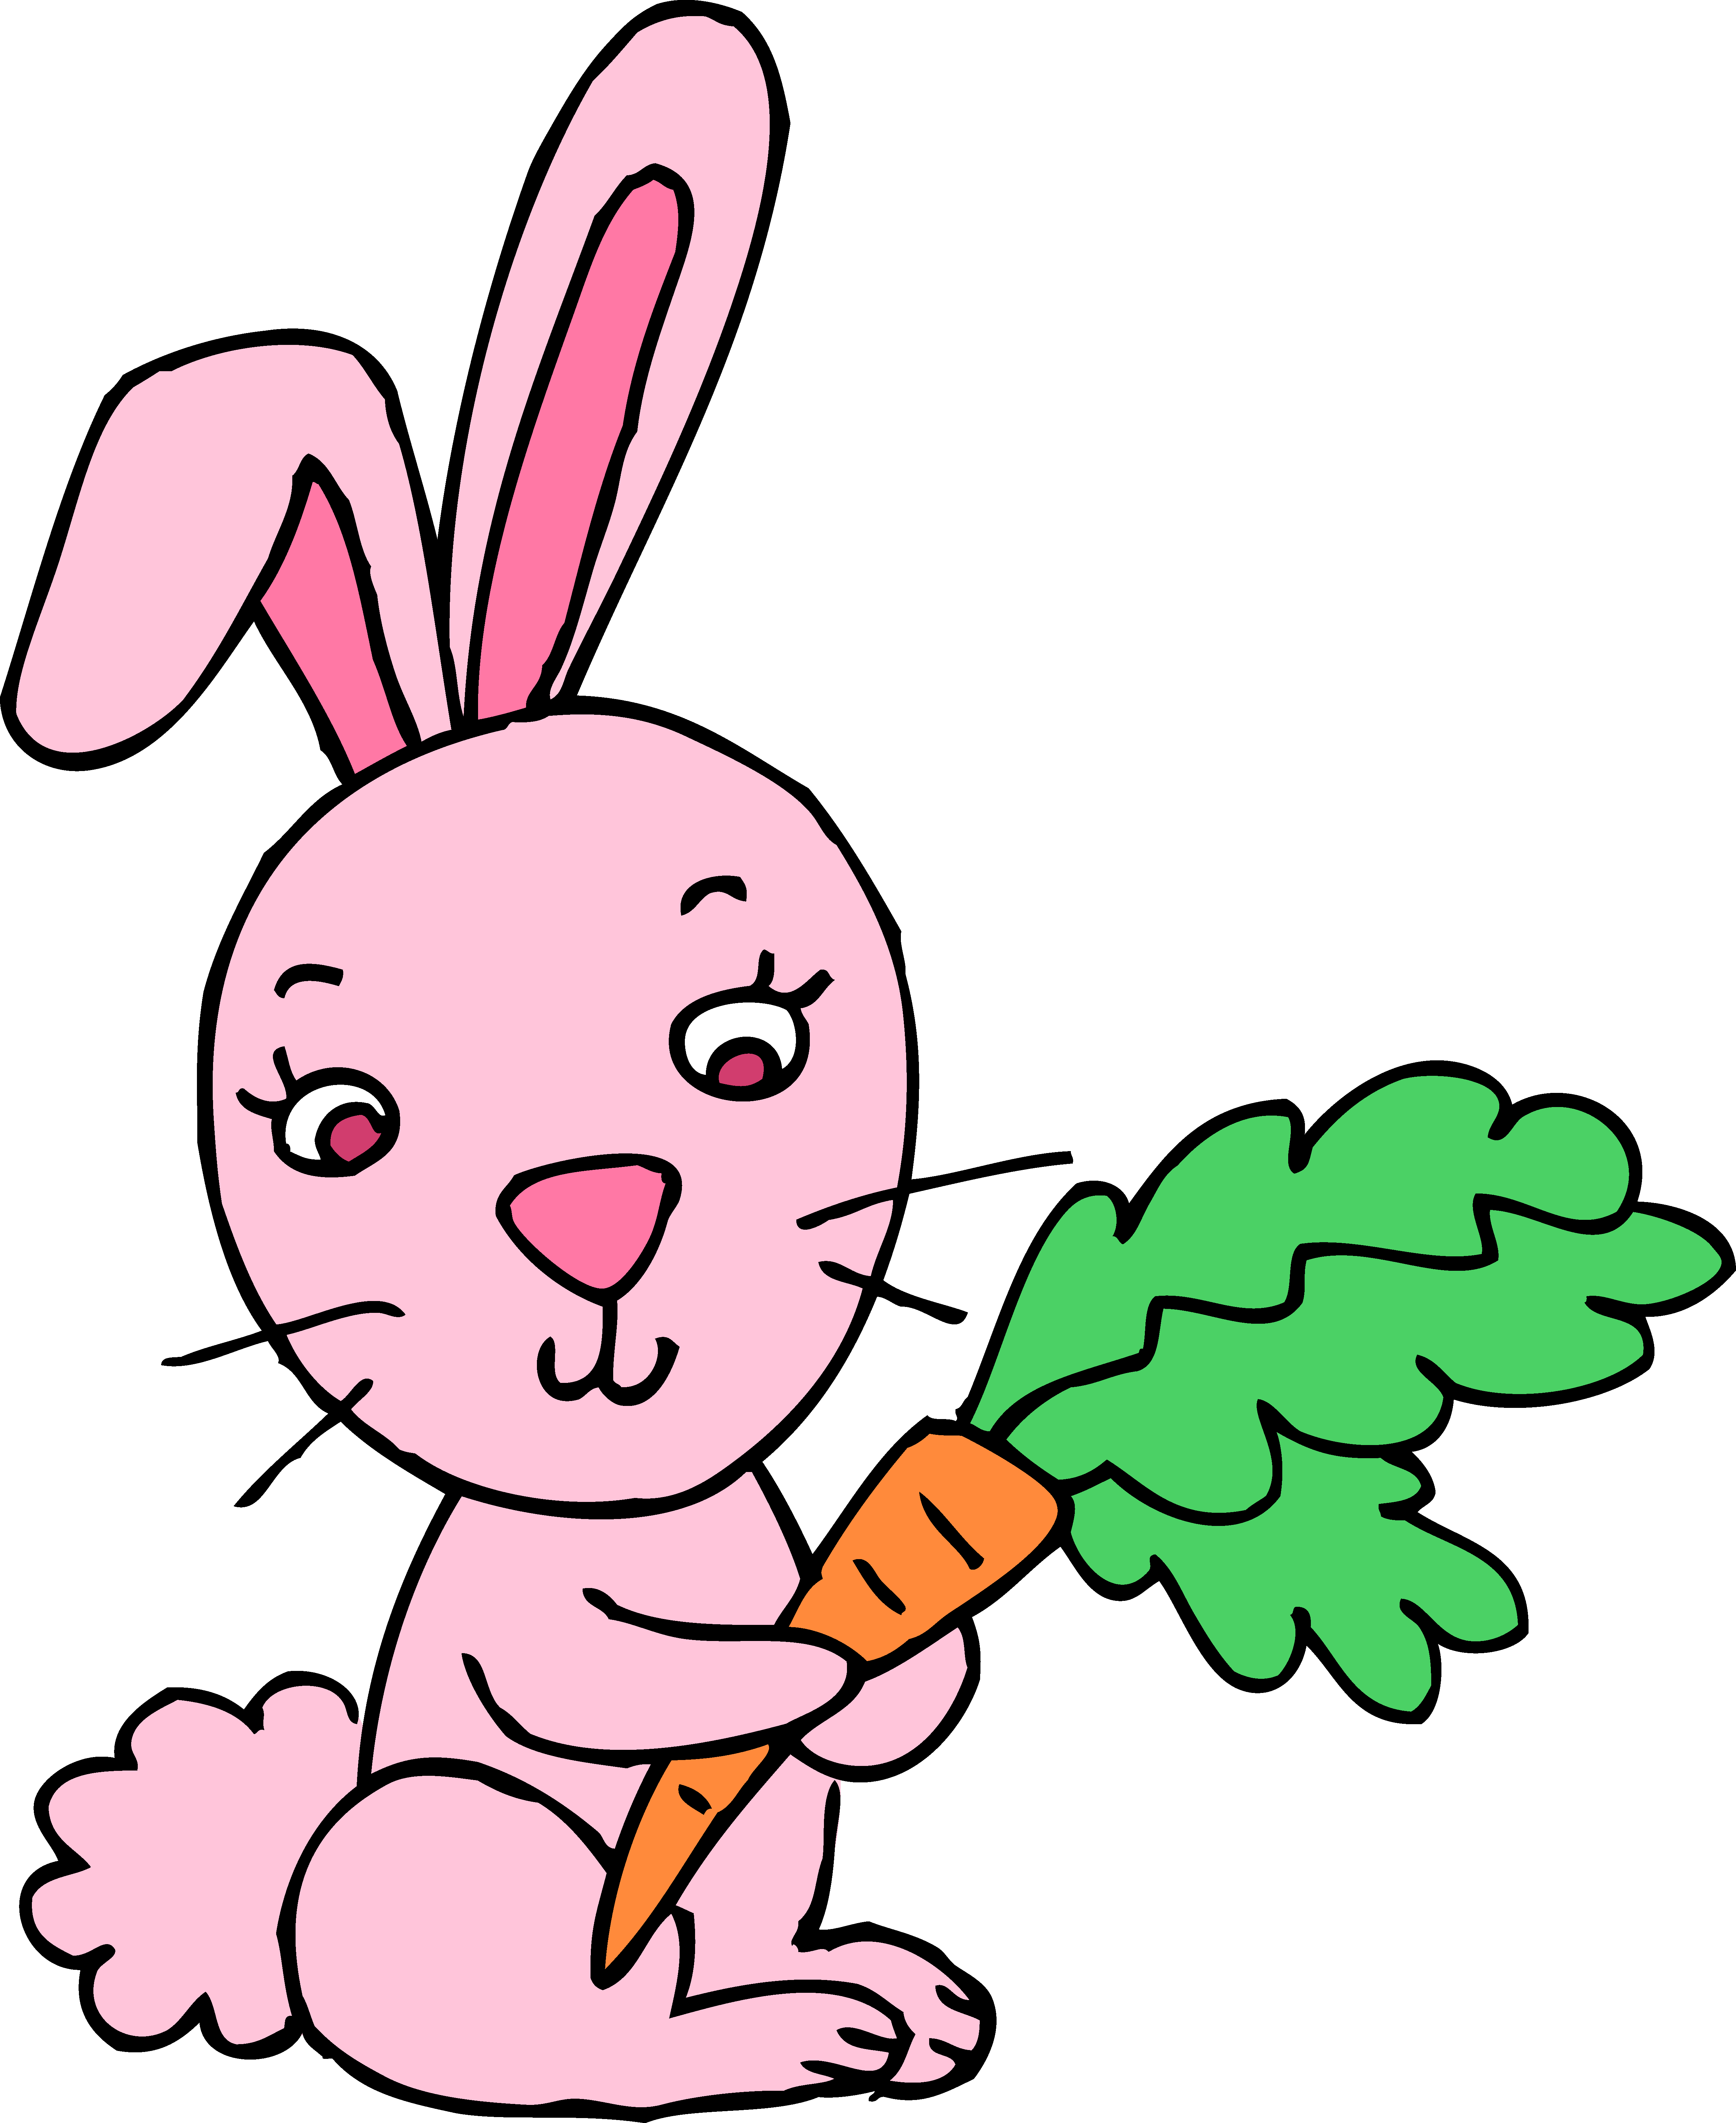 Logo clipart rabbit. Pink bunny with carrot